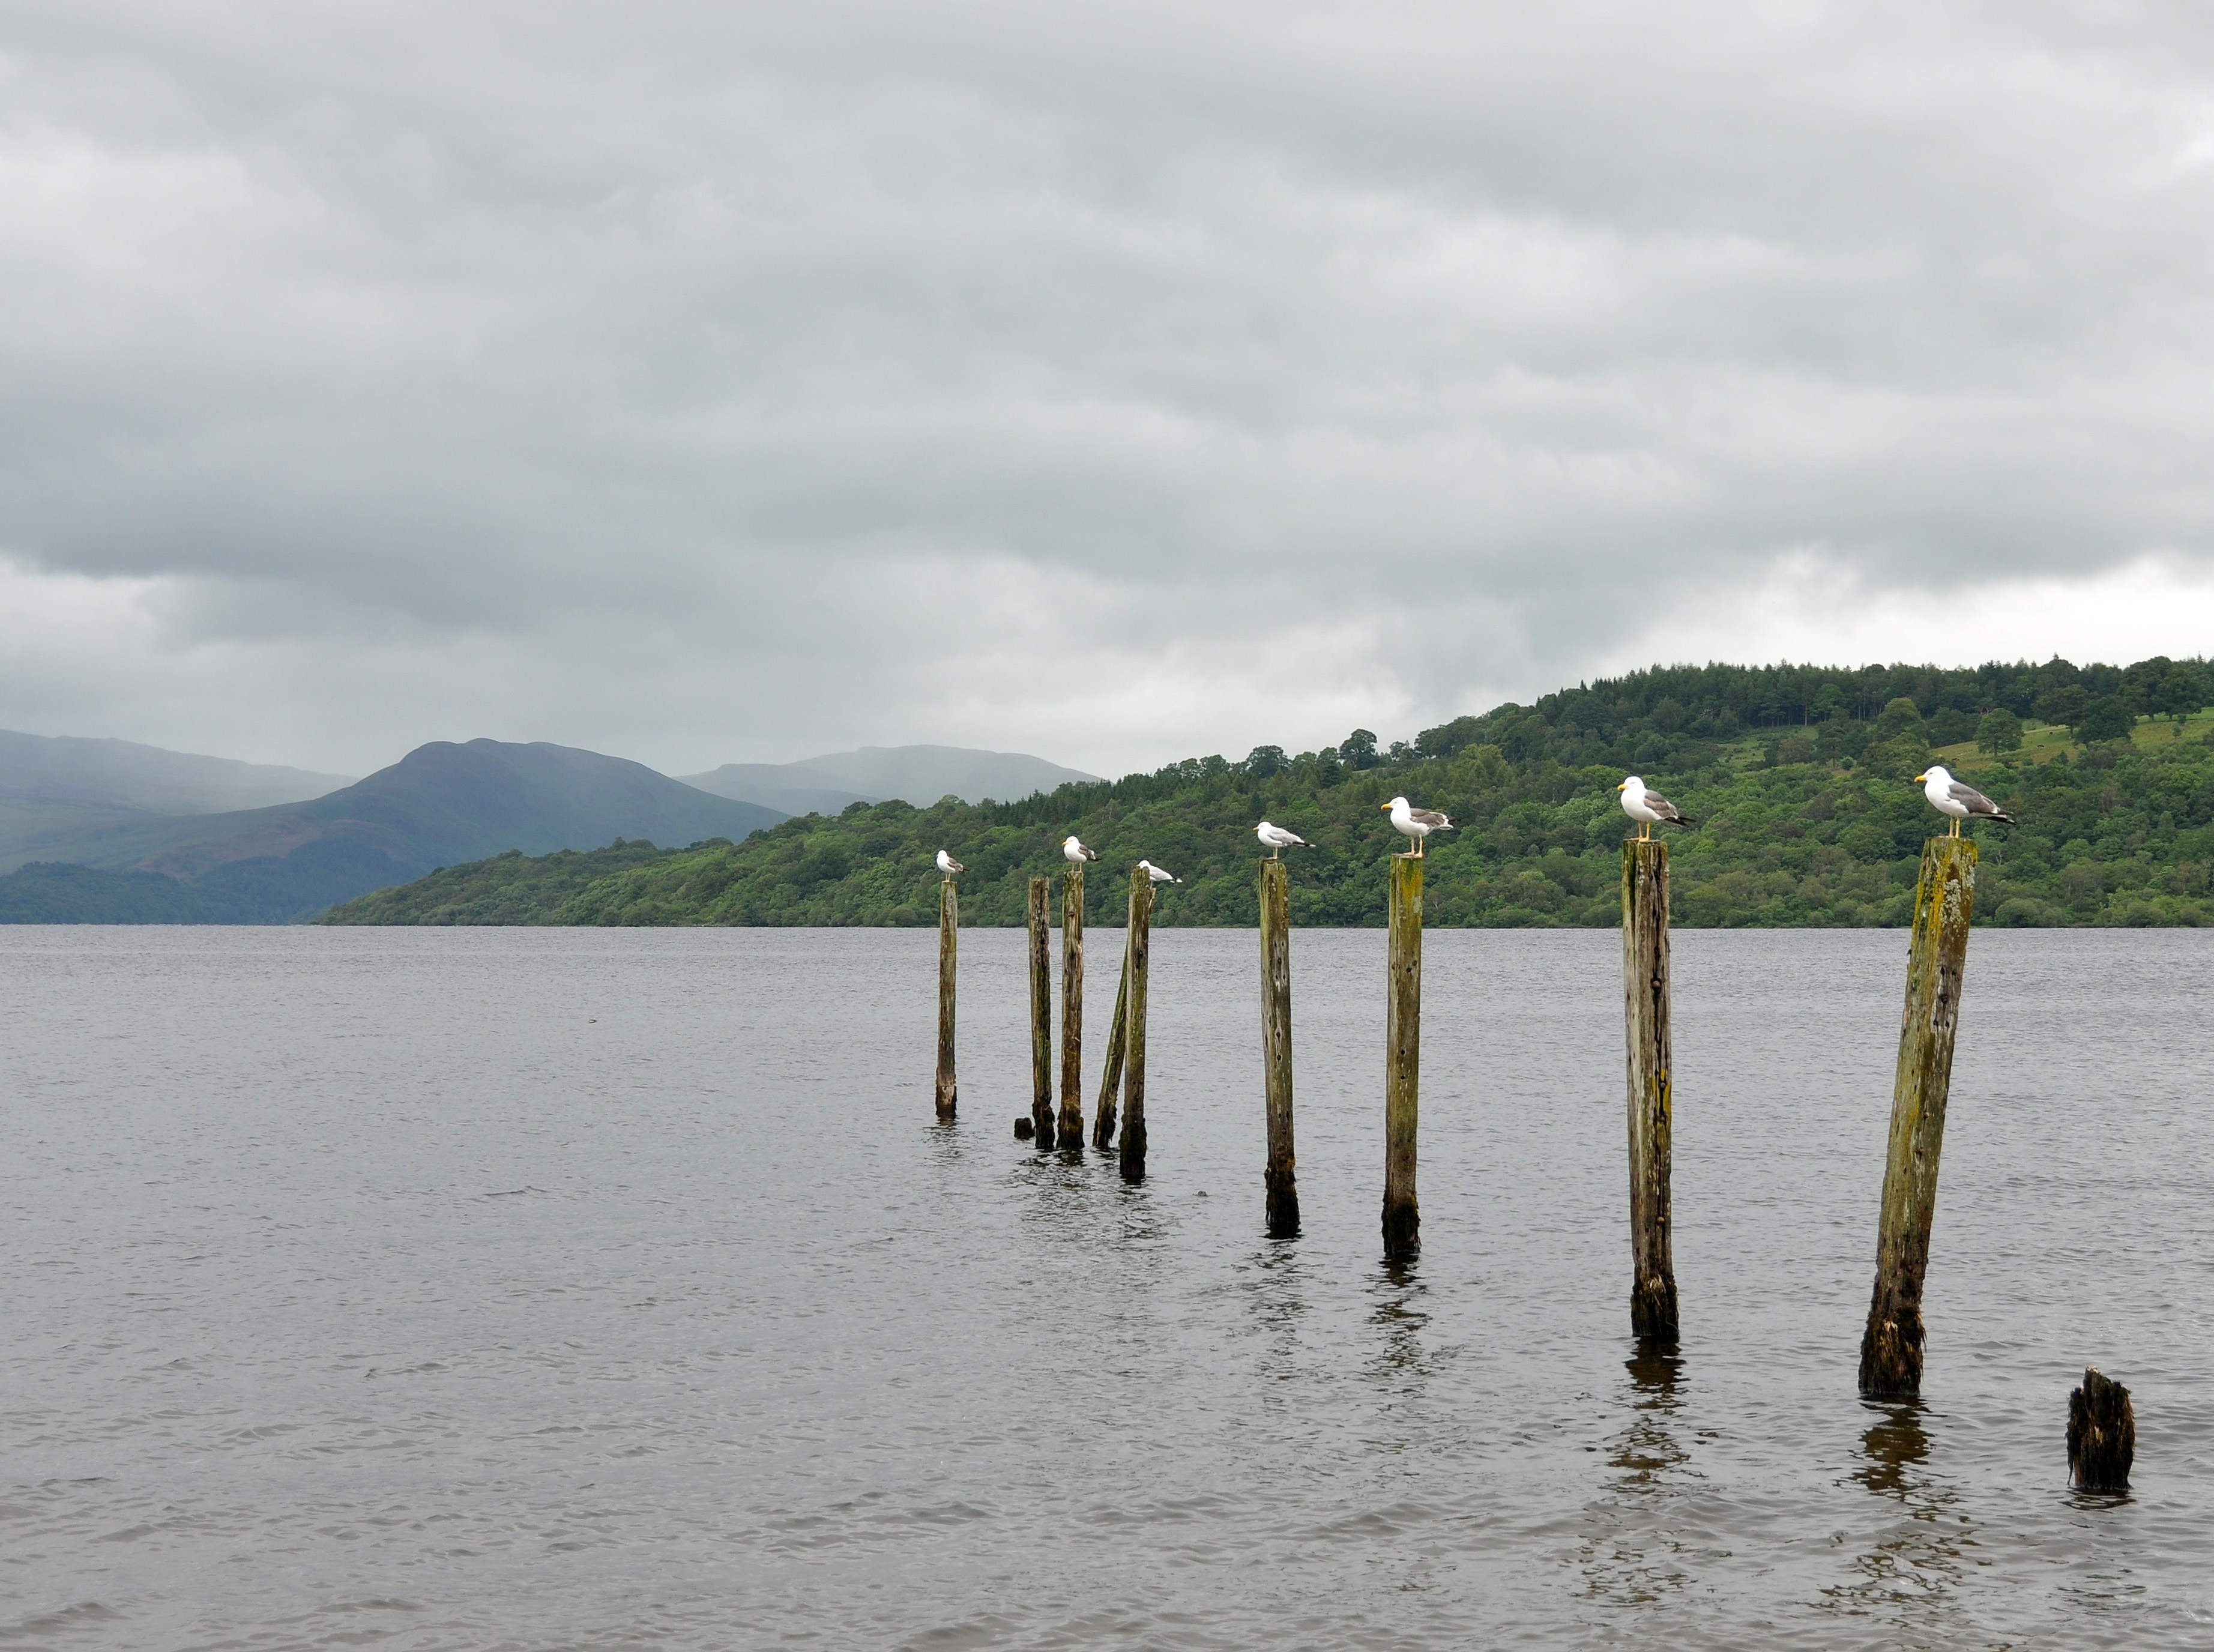 Posts (with herring gulls) at Duck Bay, on the southern edge of Loch Lomond, Scotland